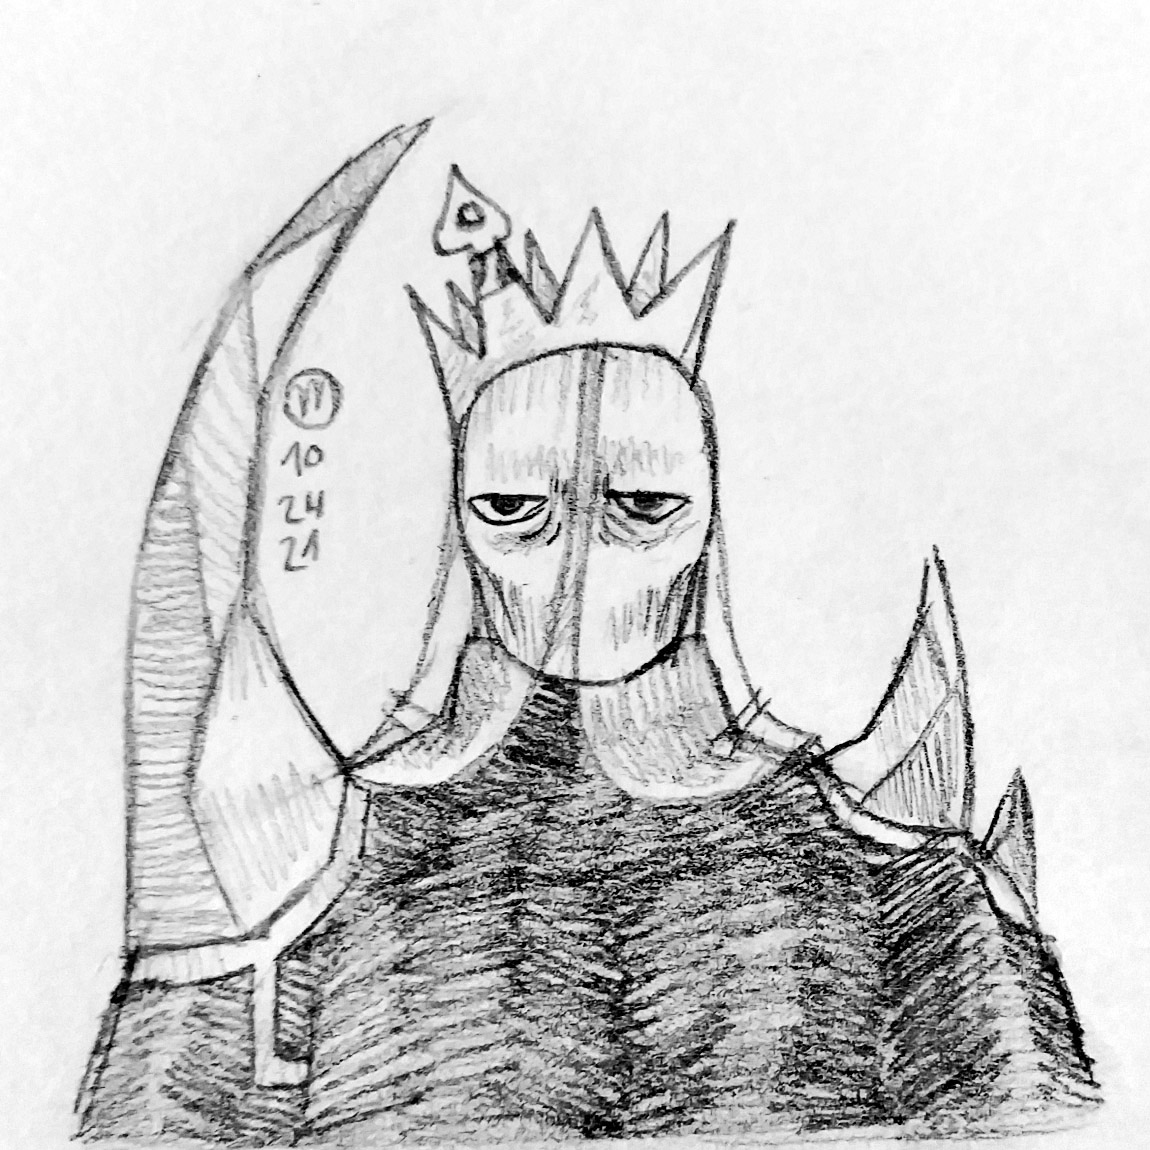 A drawn bust of a person with a severe expression, wearing a crown and dark outfit, with spikes coming out of her shoulders.